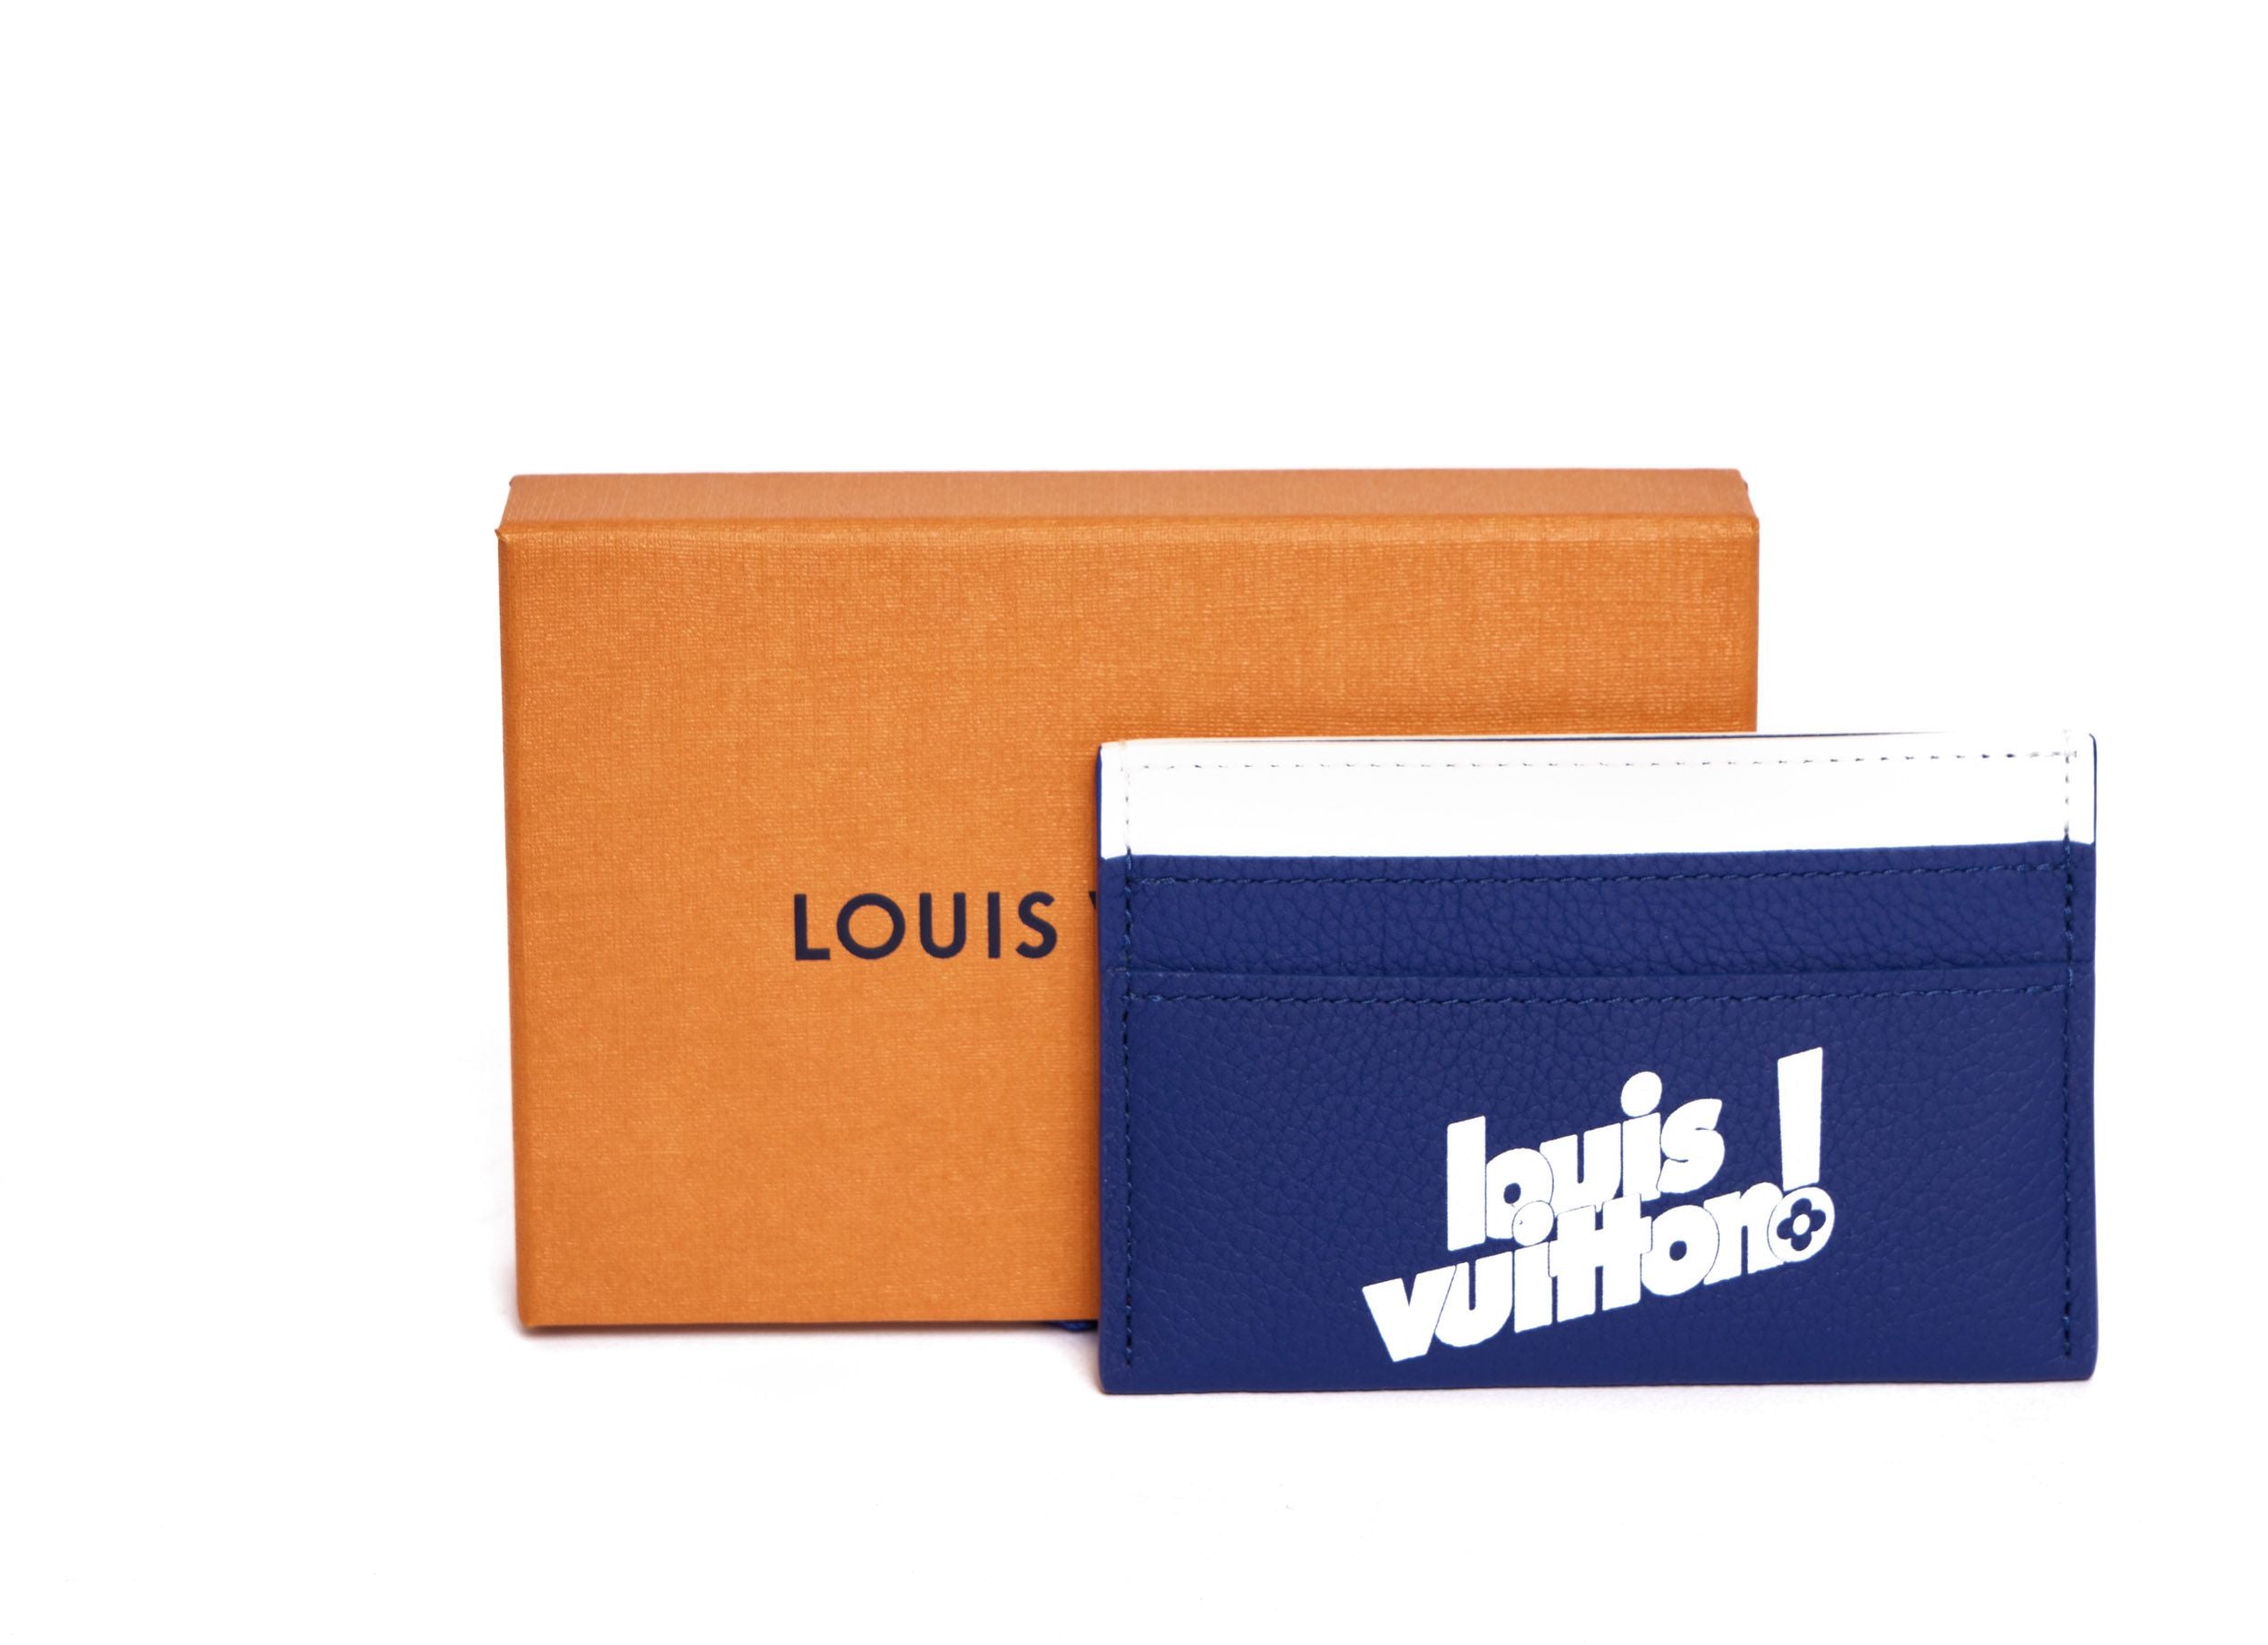 Products by Louis Vuitton: Card Holder